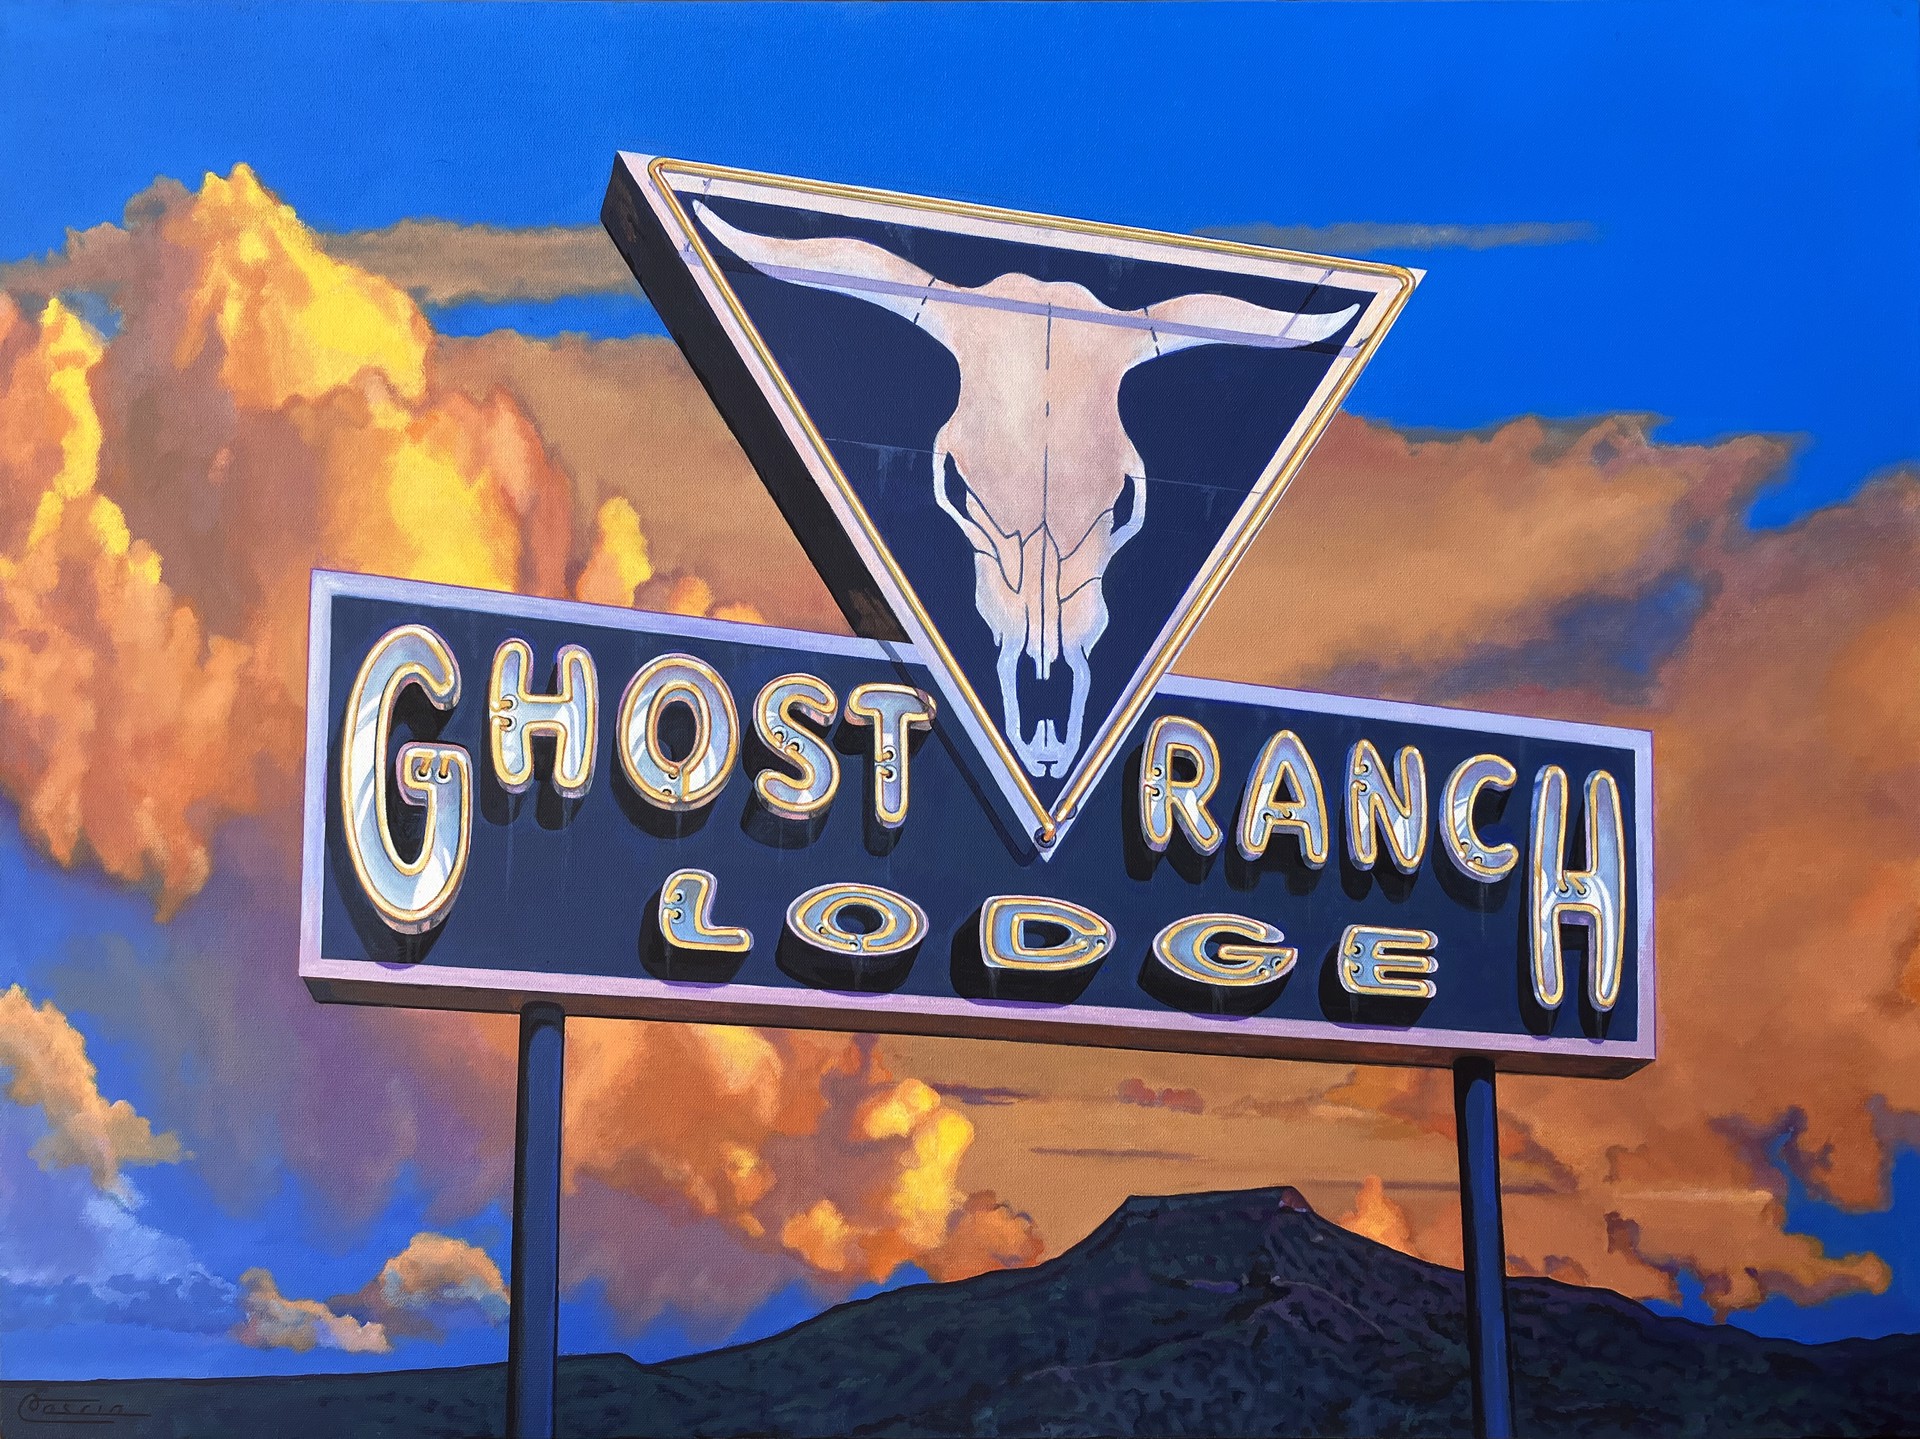 Ghost Ranch Lodge by Bruce Cascia